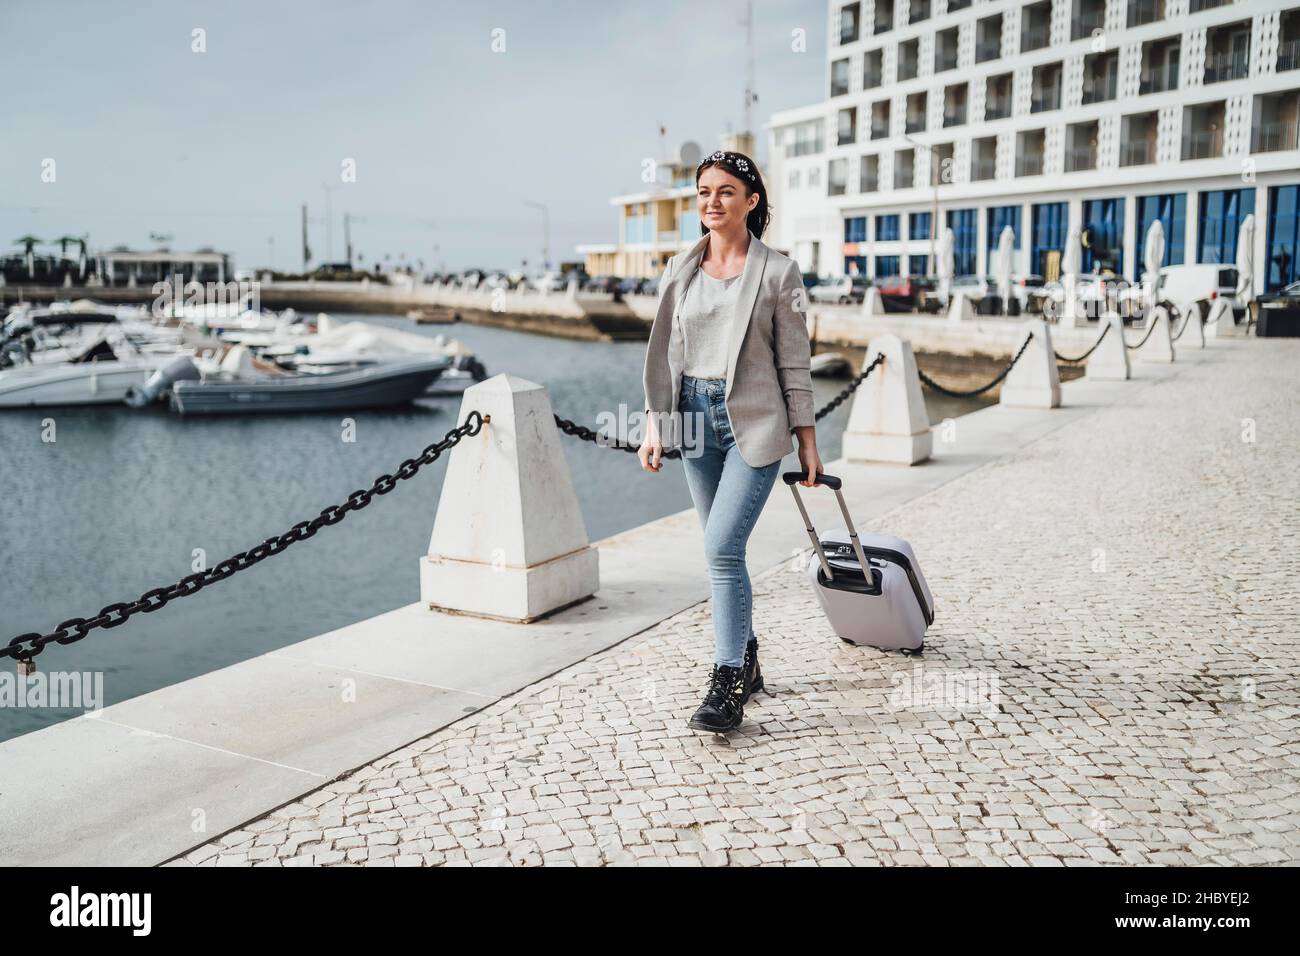 Young woman with suitcase walking in urban settings, Faro, Portugal Stock Photo